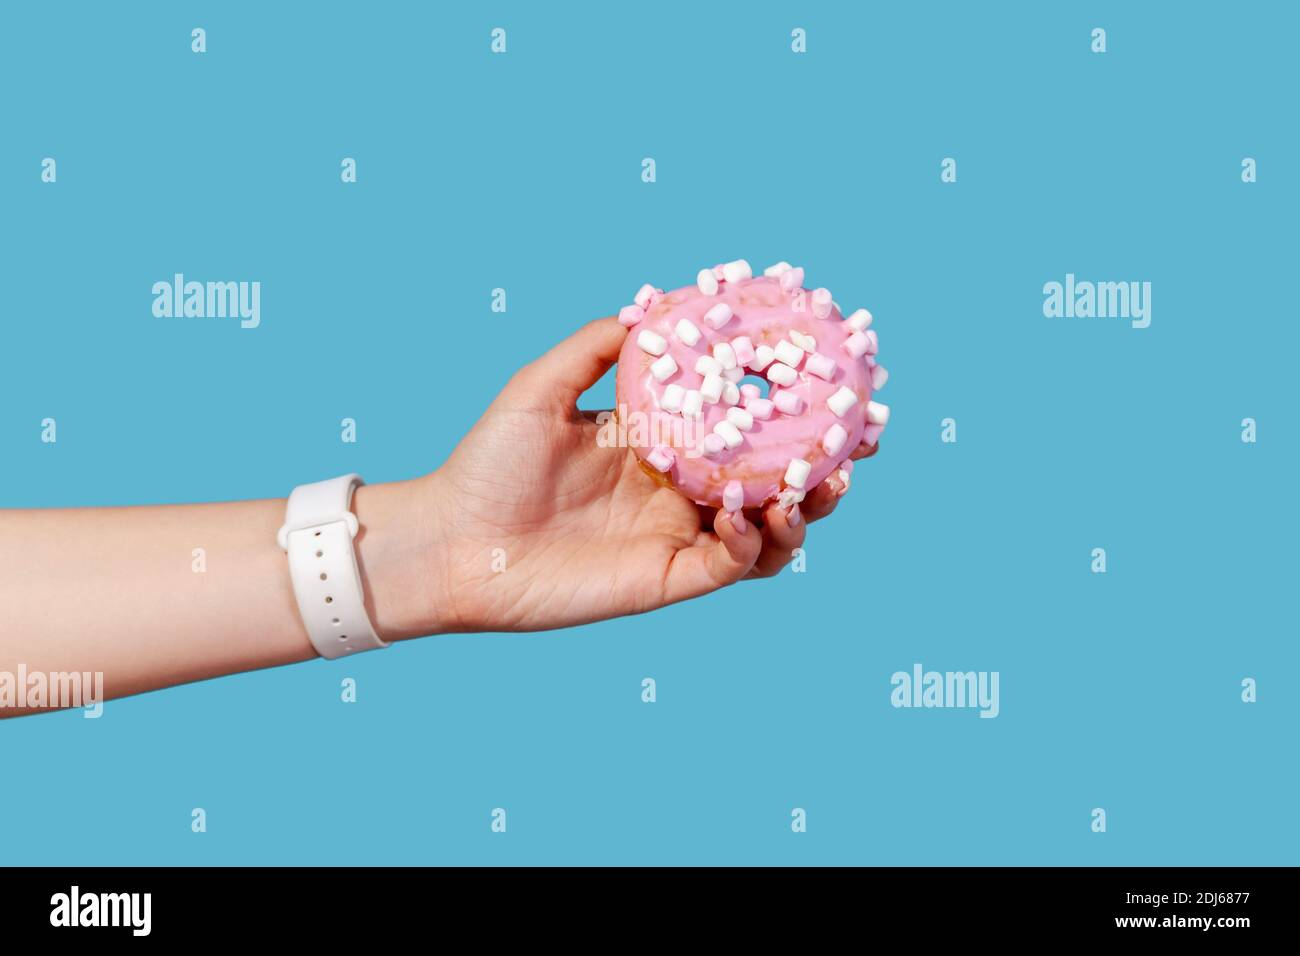 Close up side view female hand holding sweet round donut with pink icing, delicious junk dessert saturated with fats and carbohydrates. Indoor studio Stock Photo